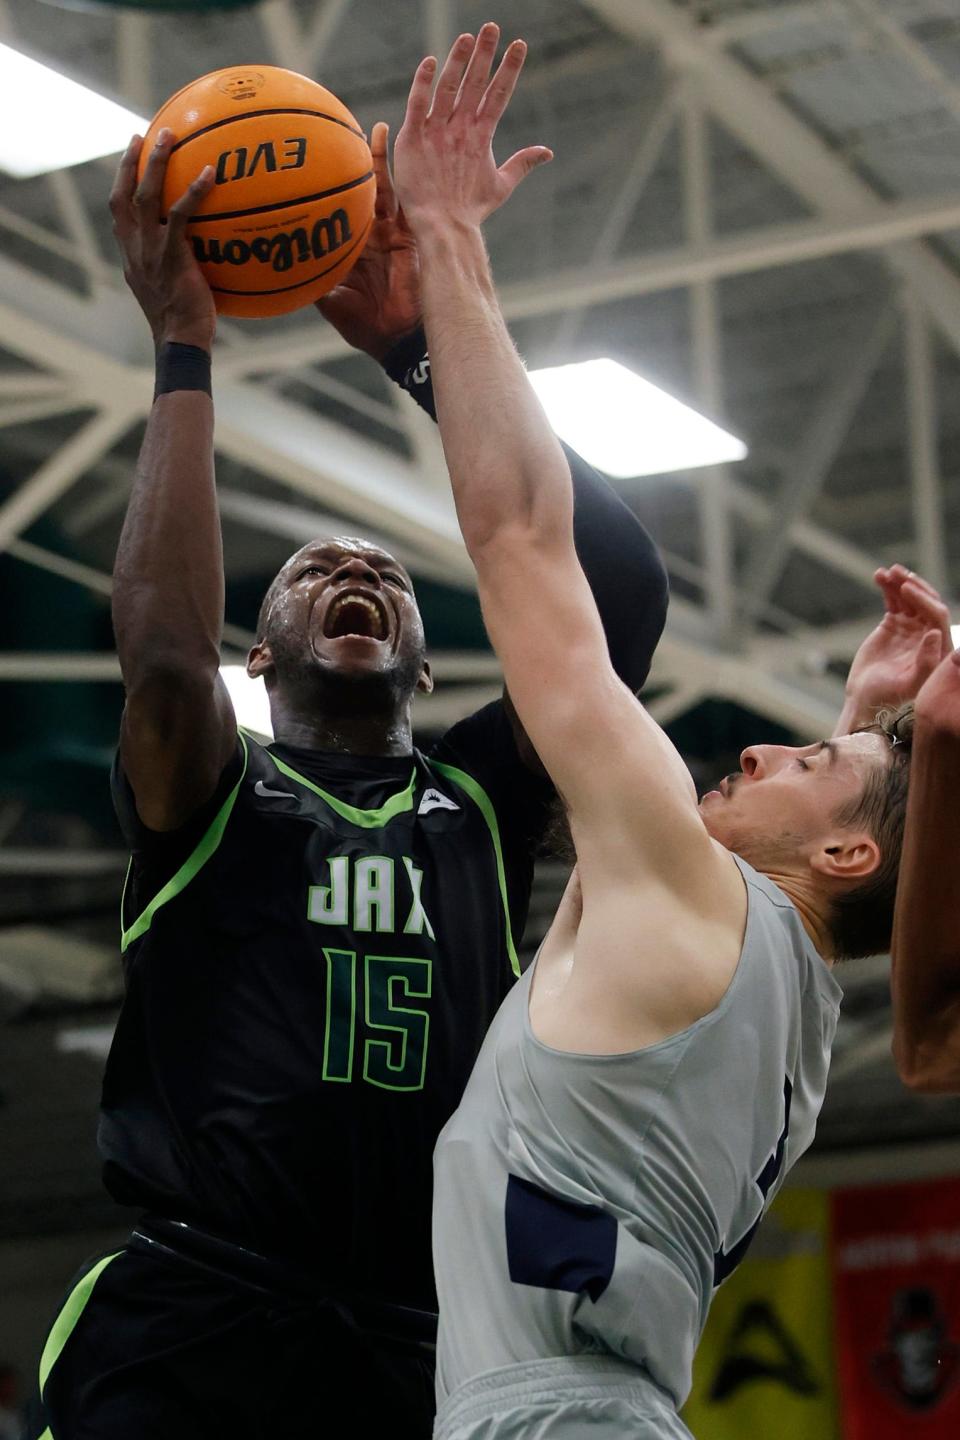 Carter Hendricksen has been UNF's most consistent defender during his career, guarding perimeter players but also going inside to take bigger opponents in the post such as JU's Osayi Osifo (15).